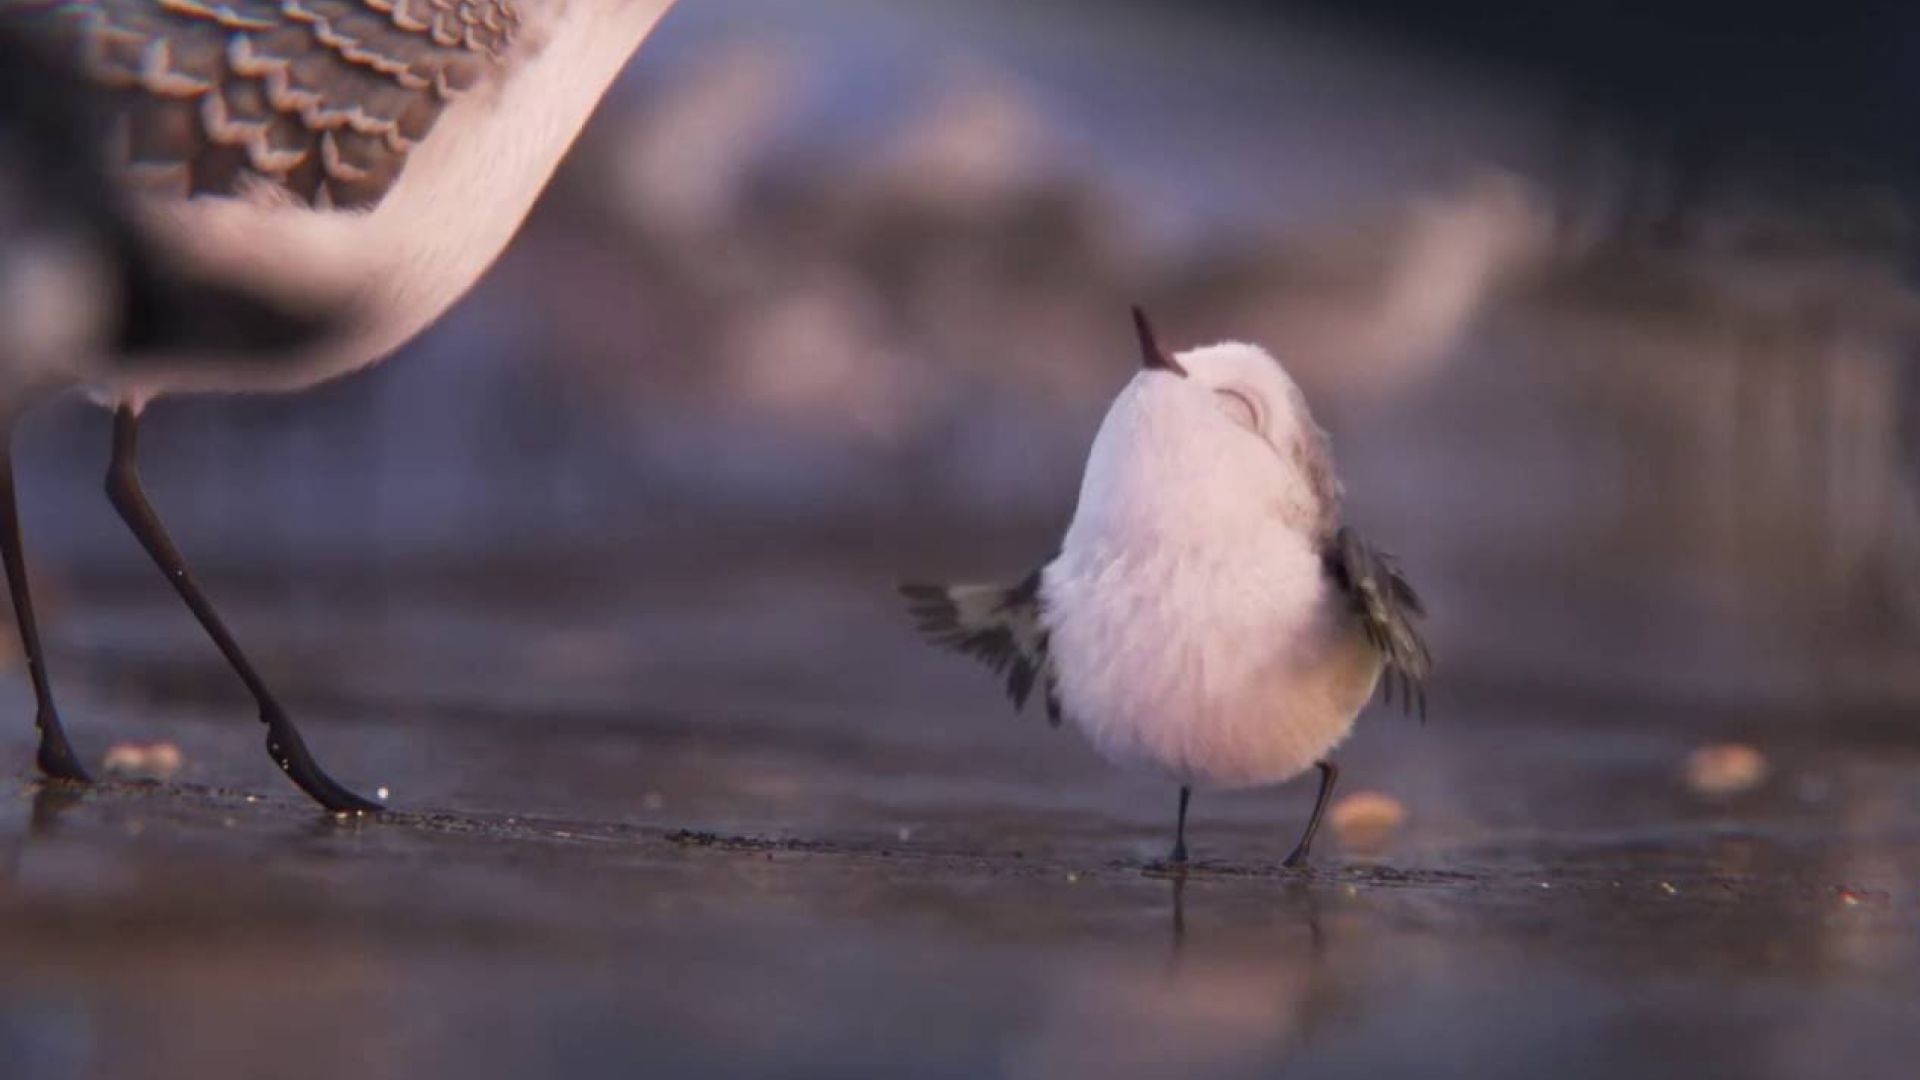 First look at Piper the bird, the adorable new character for